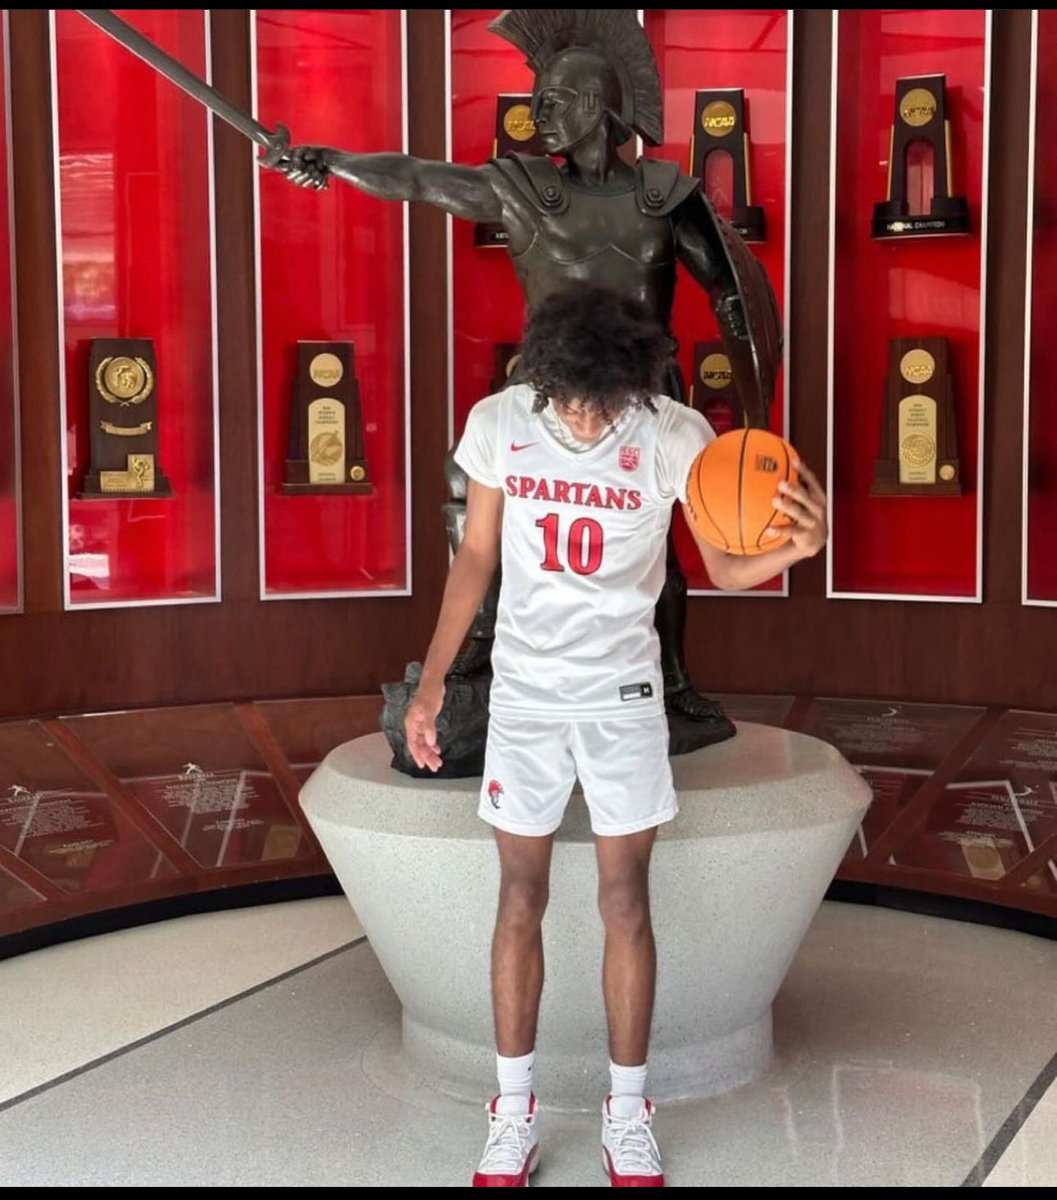 2024 forward @KylerlambJr has committed to the University of Tampa!